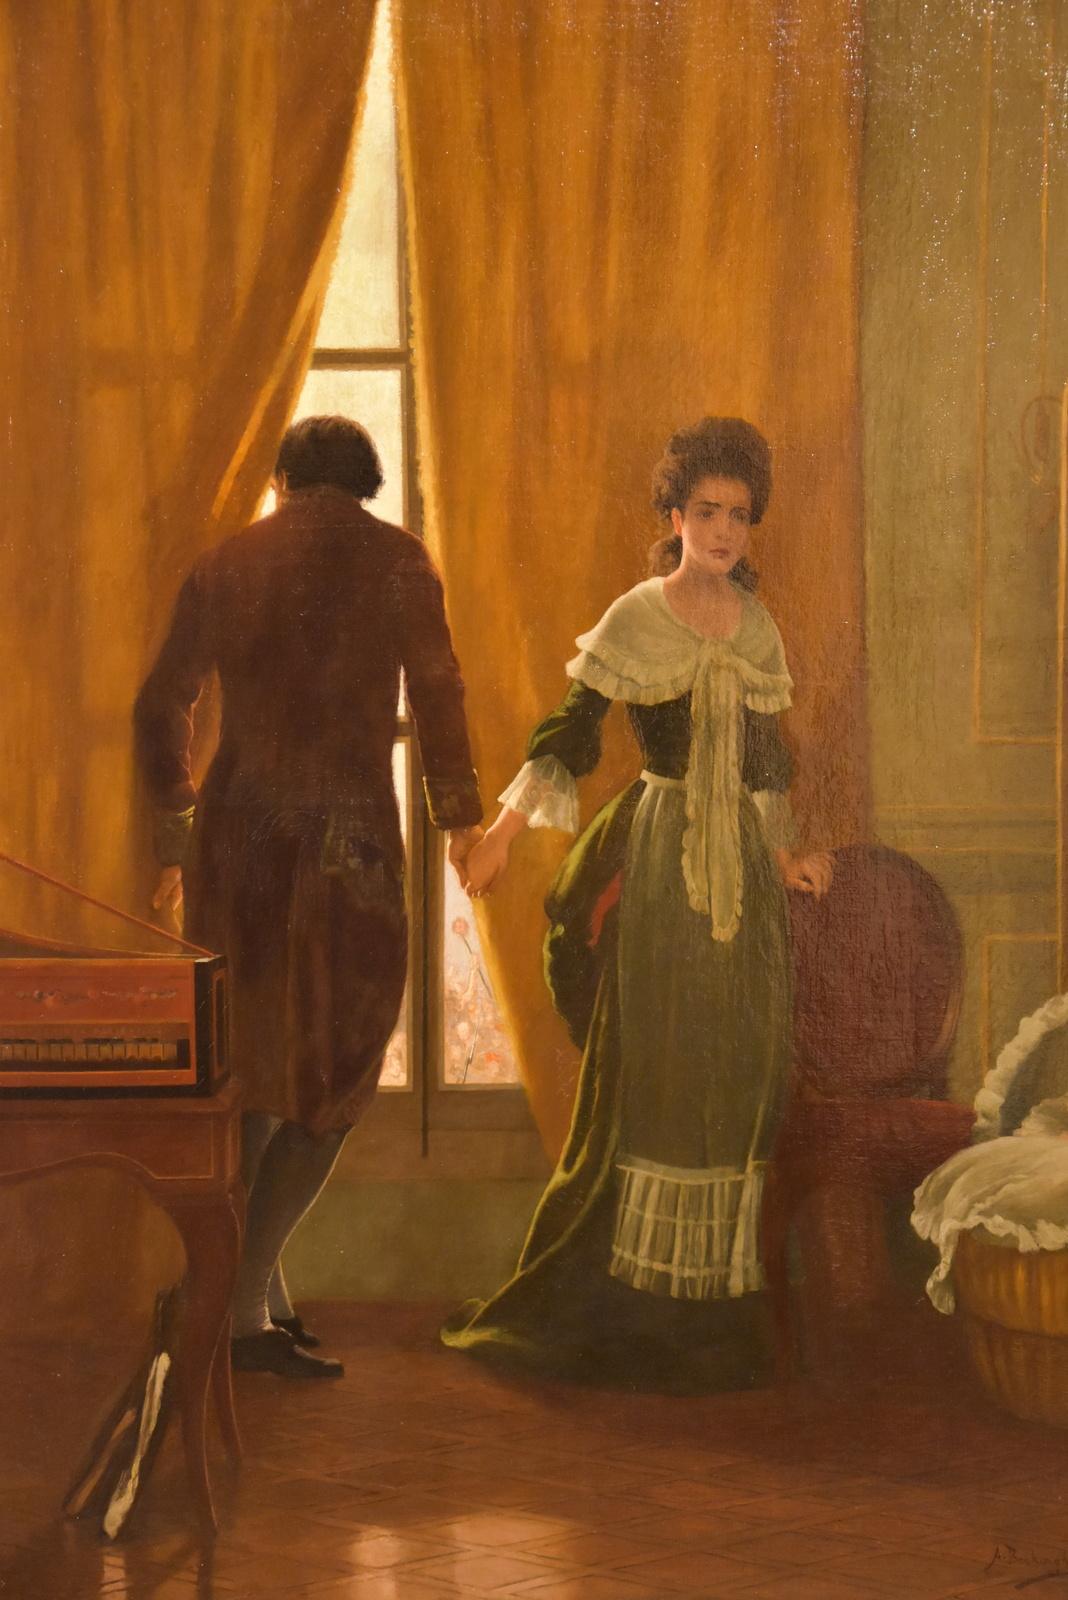 who is the woman in the french revolution painting